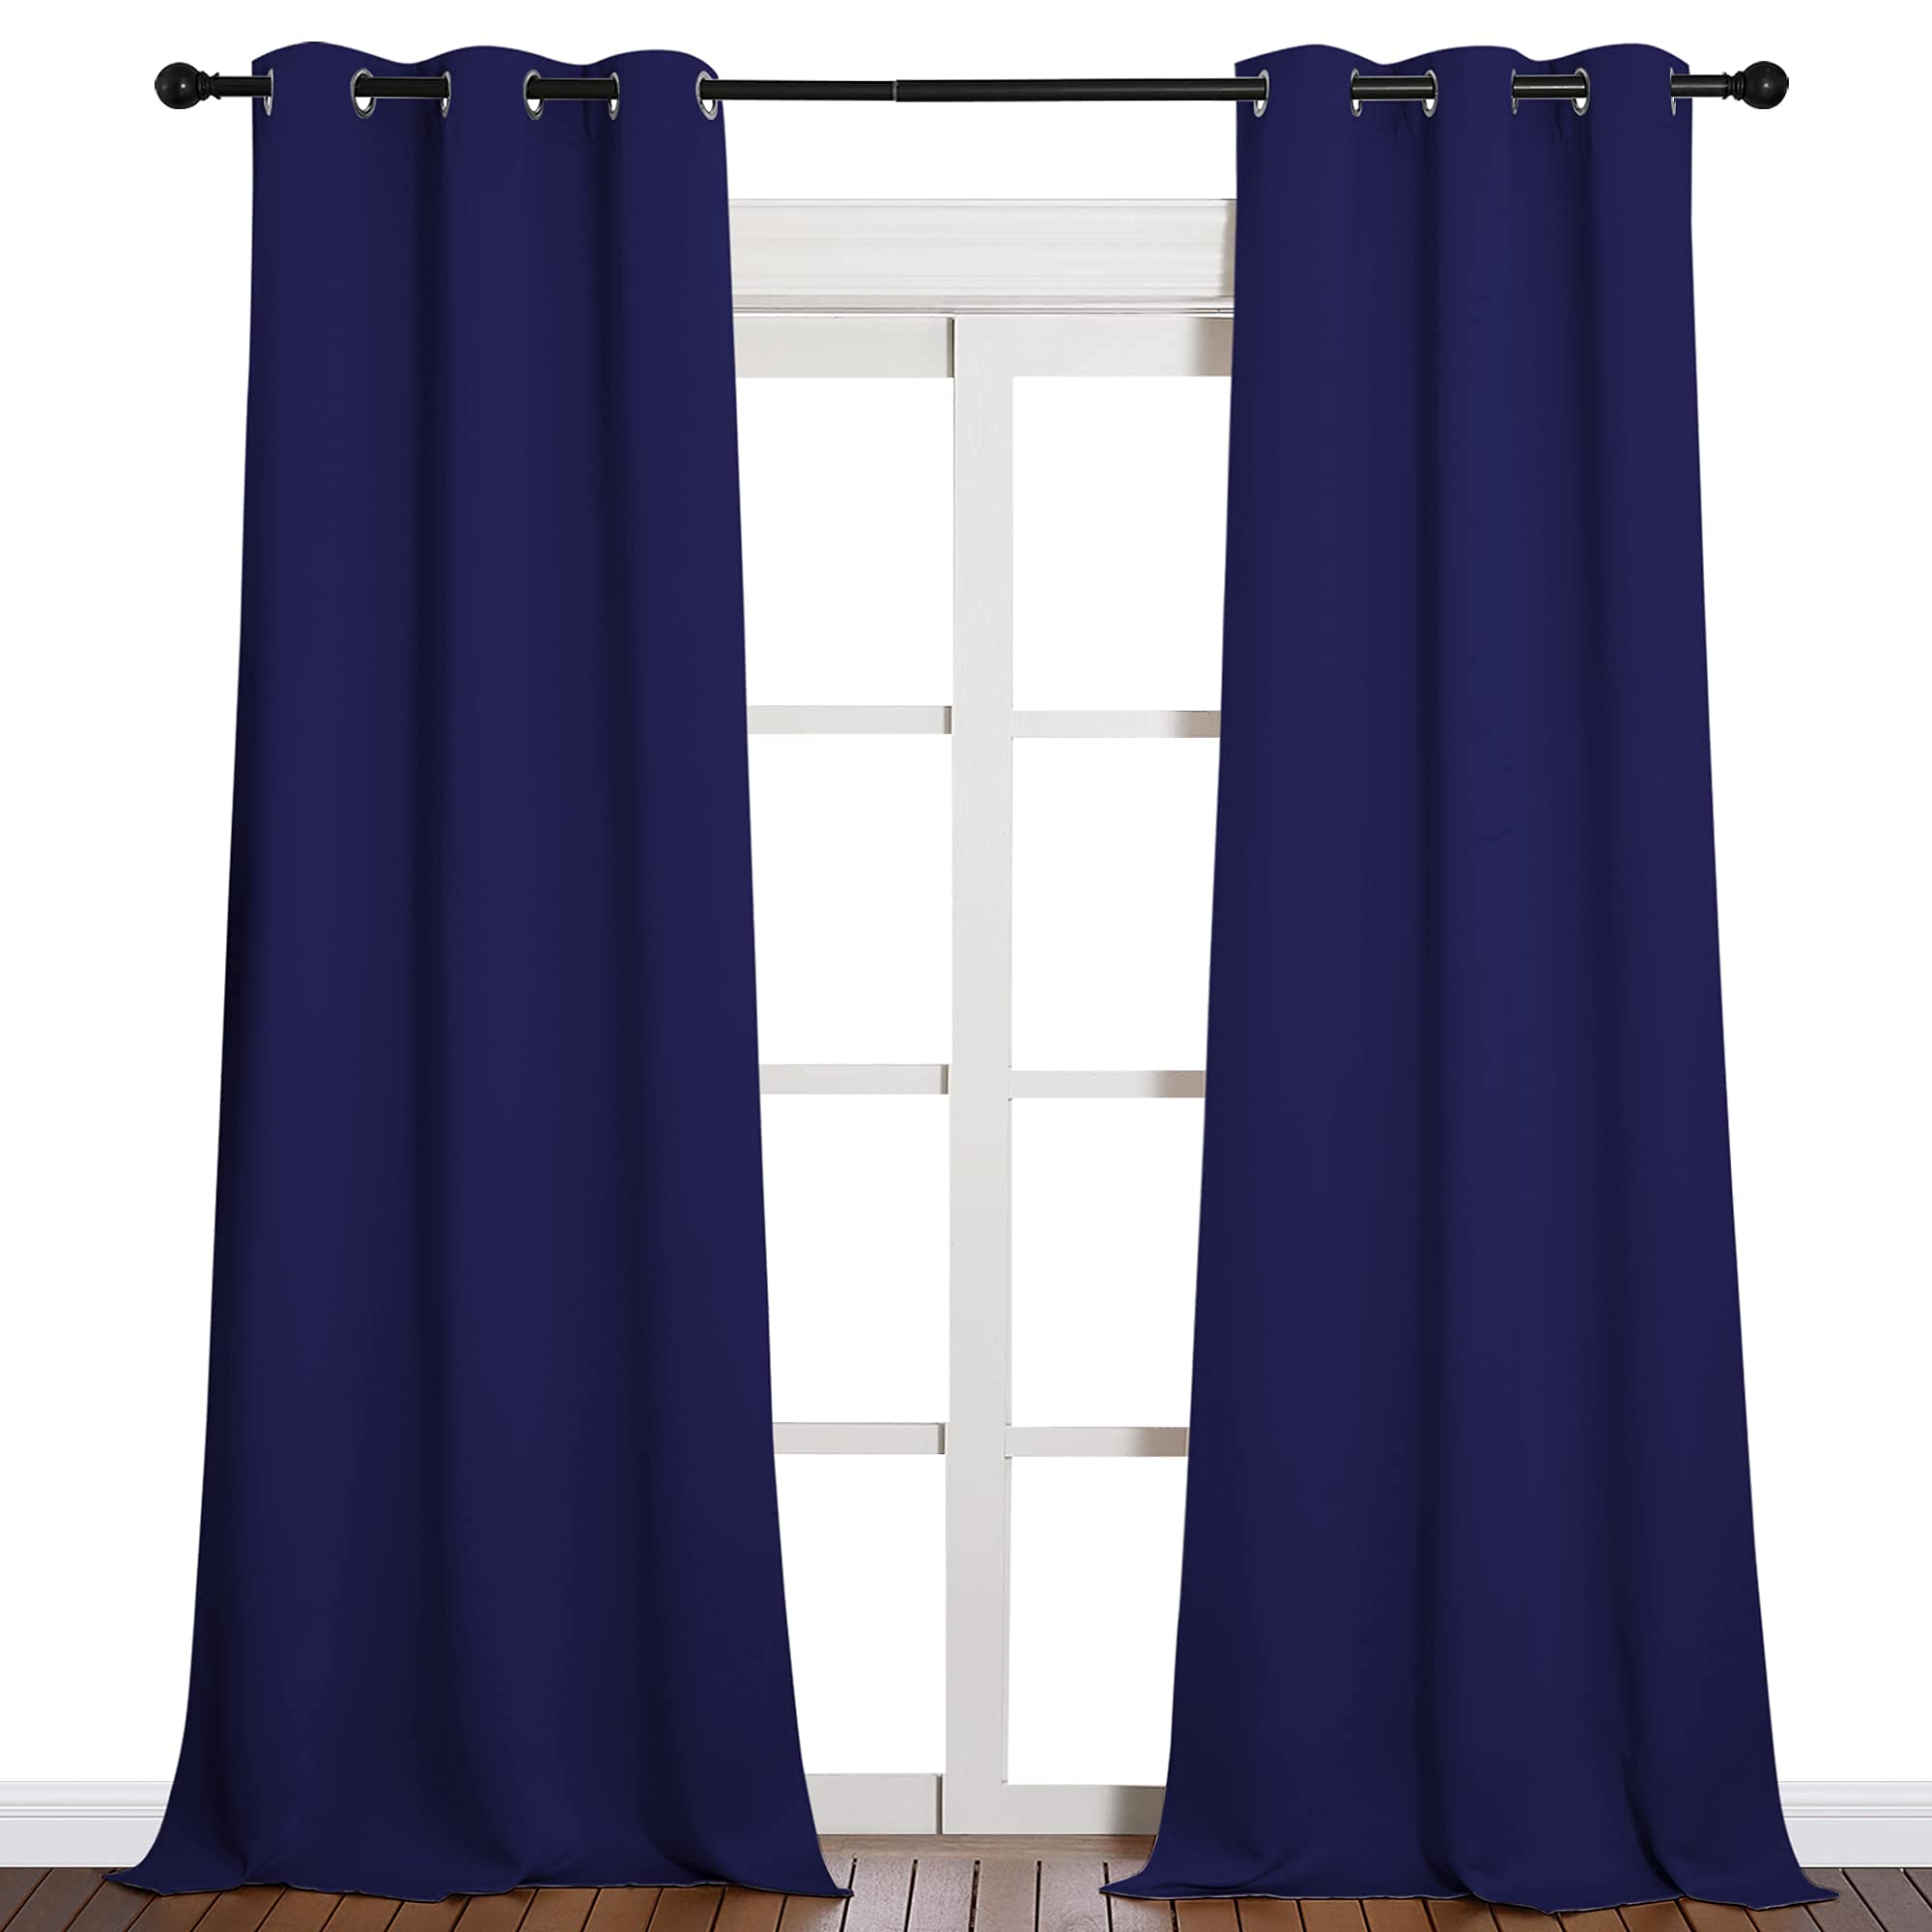 NICETOWN Window Drapes Long Curtains - Living Room Panels Grommet Top Window Treatment for Hall & Guest Room (Navy Blue, 42 inches Wide x 90 inches Long, 2 Pieces)